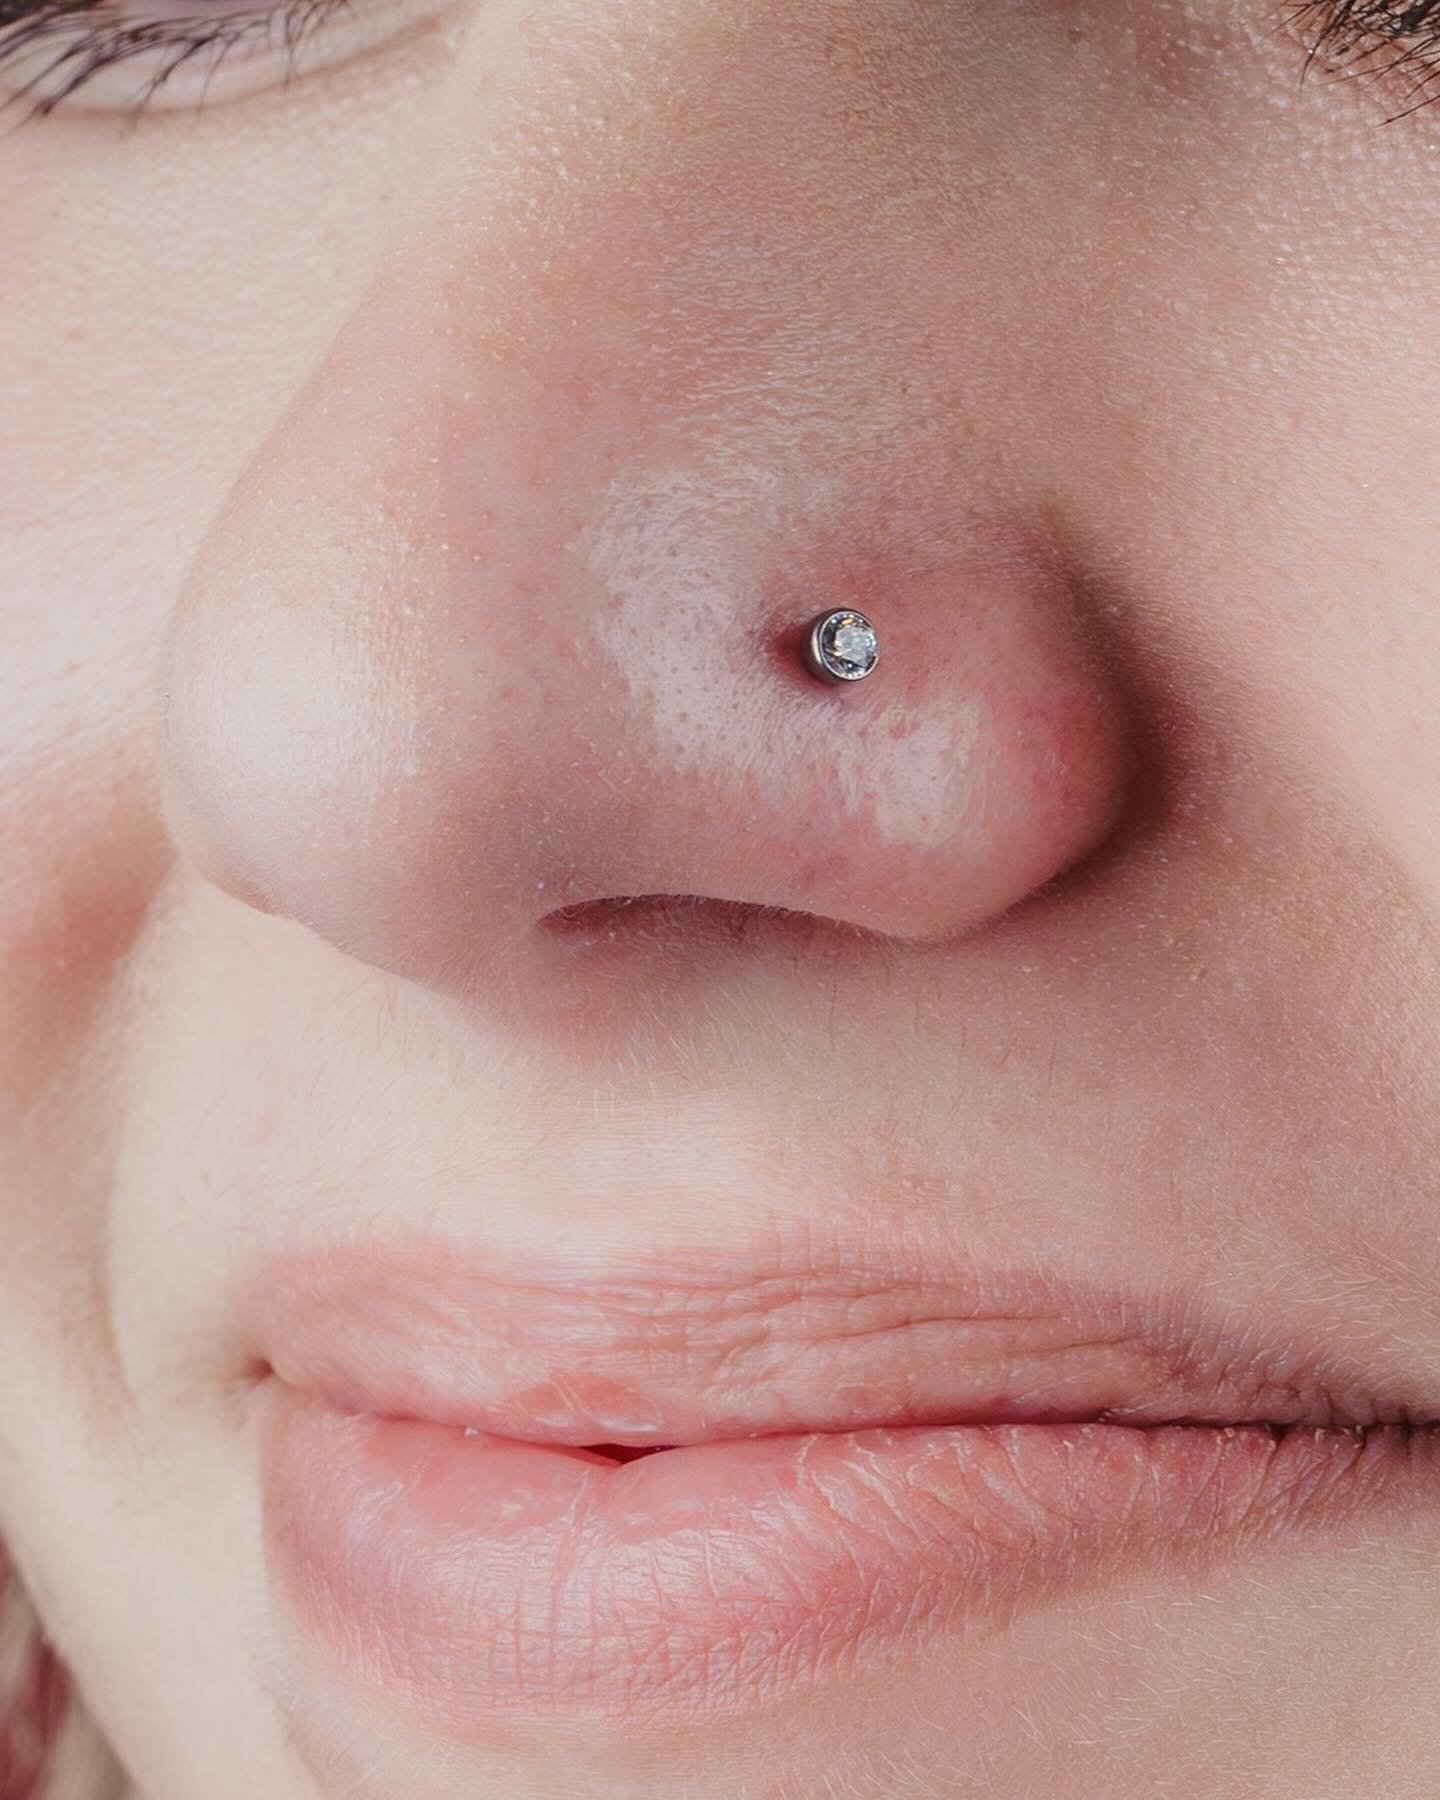 FLY TO🐋💫
 
THE STARS 
 
A classic nostril for Amelia, with a cz end from Neometal. Performed by Tanner✨
⠀⠀⠀⠀⠀⠀⠀⠀⠀
~  @research.chemicals ~ 
⠀⠀⠀⠀⠀⠀⠀⠀⠀
~  @neometaljewelry ~
⠀⠀⠀⠀⠀⠀⠀⠀⠀
⠀⠀⠀⠀⠀⠀⠀⠀⠀
⠀⠀⠀⠀⠀⠀⠀⠀⠀
📸@mrbattle
~book your appointment🖋
~link in 